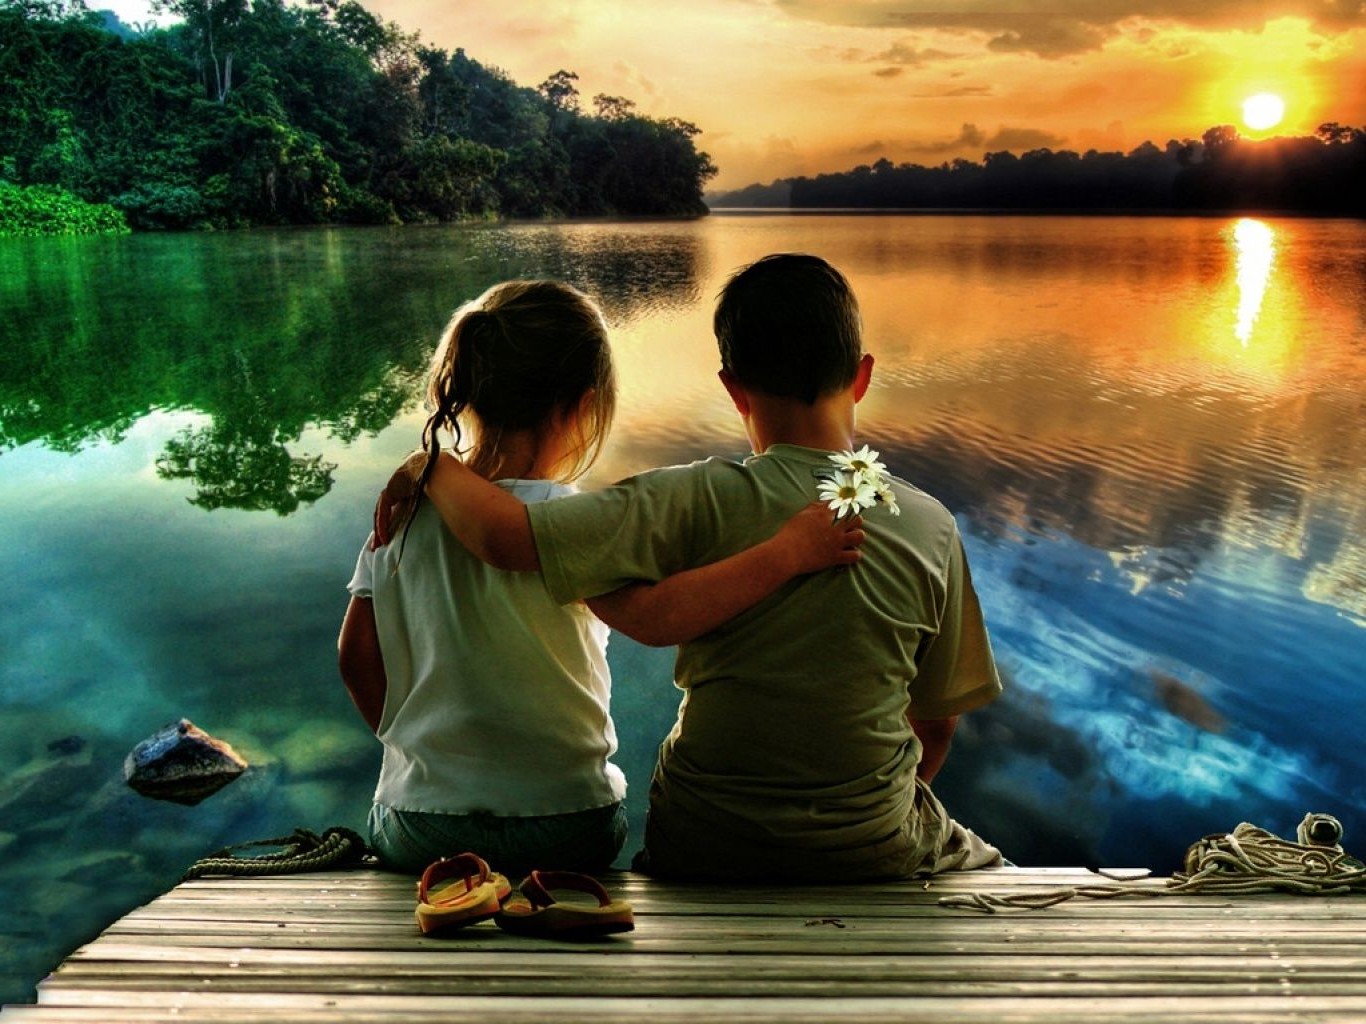 children in nature water girl lake river nature sunset reflection travel child outdoors park summer leisure dawn beautiful two love recreation couple